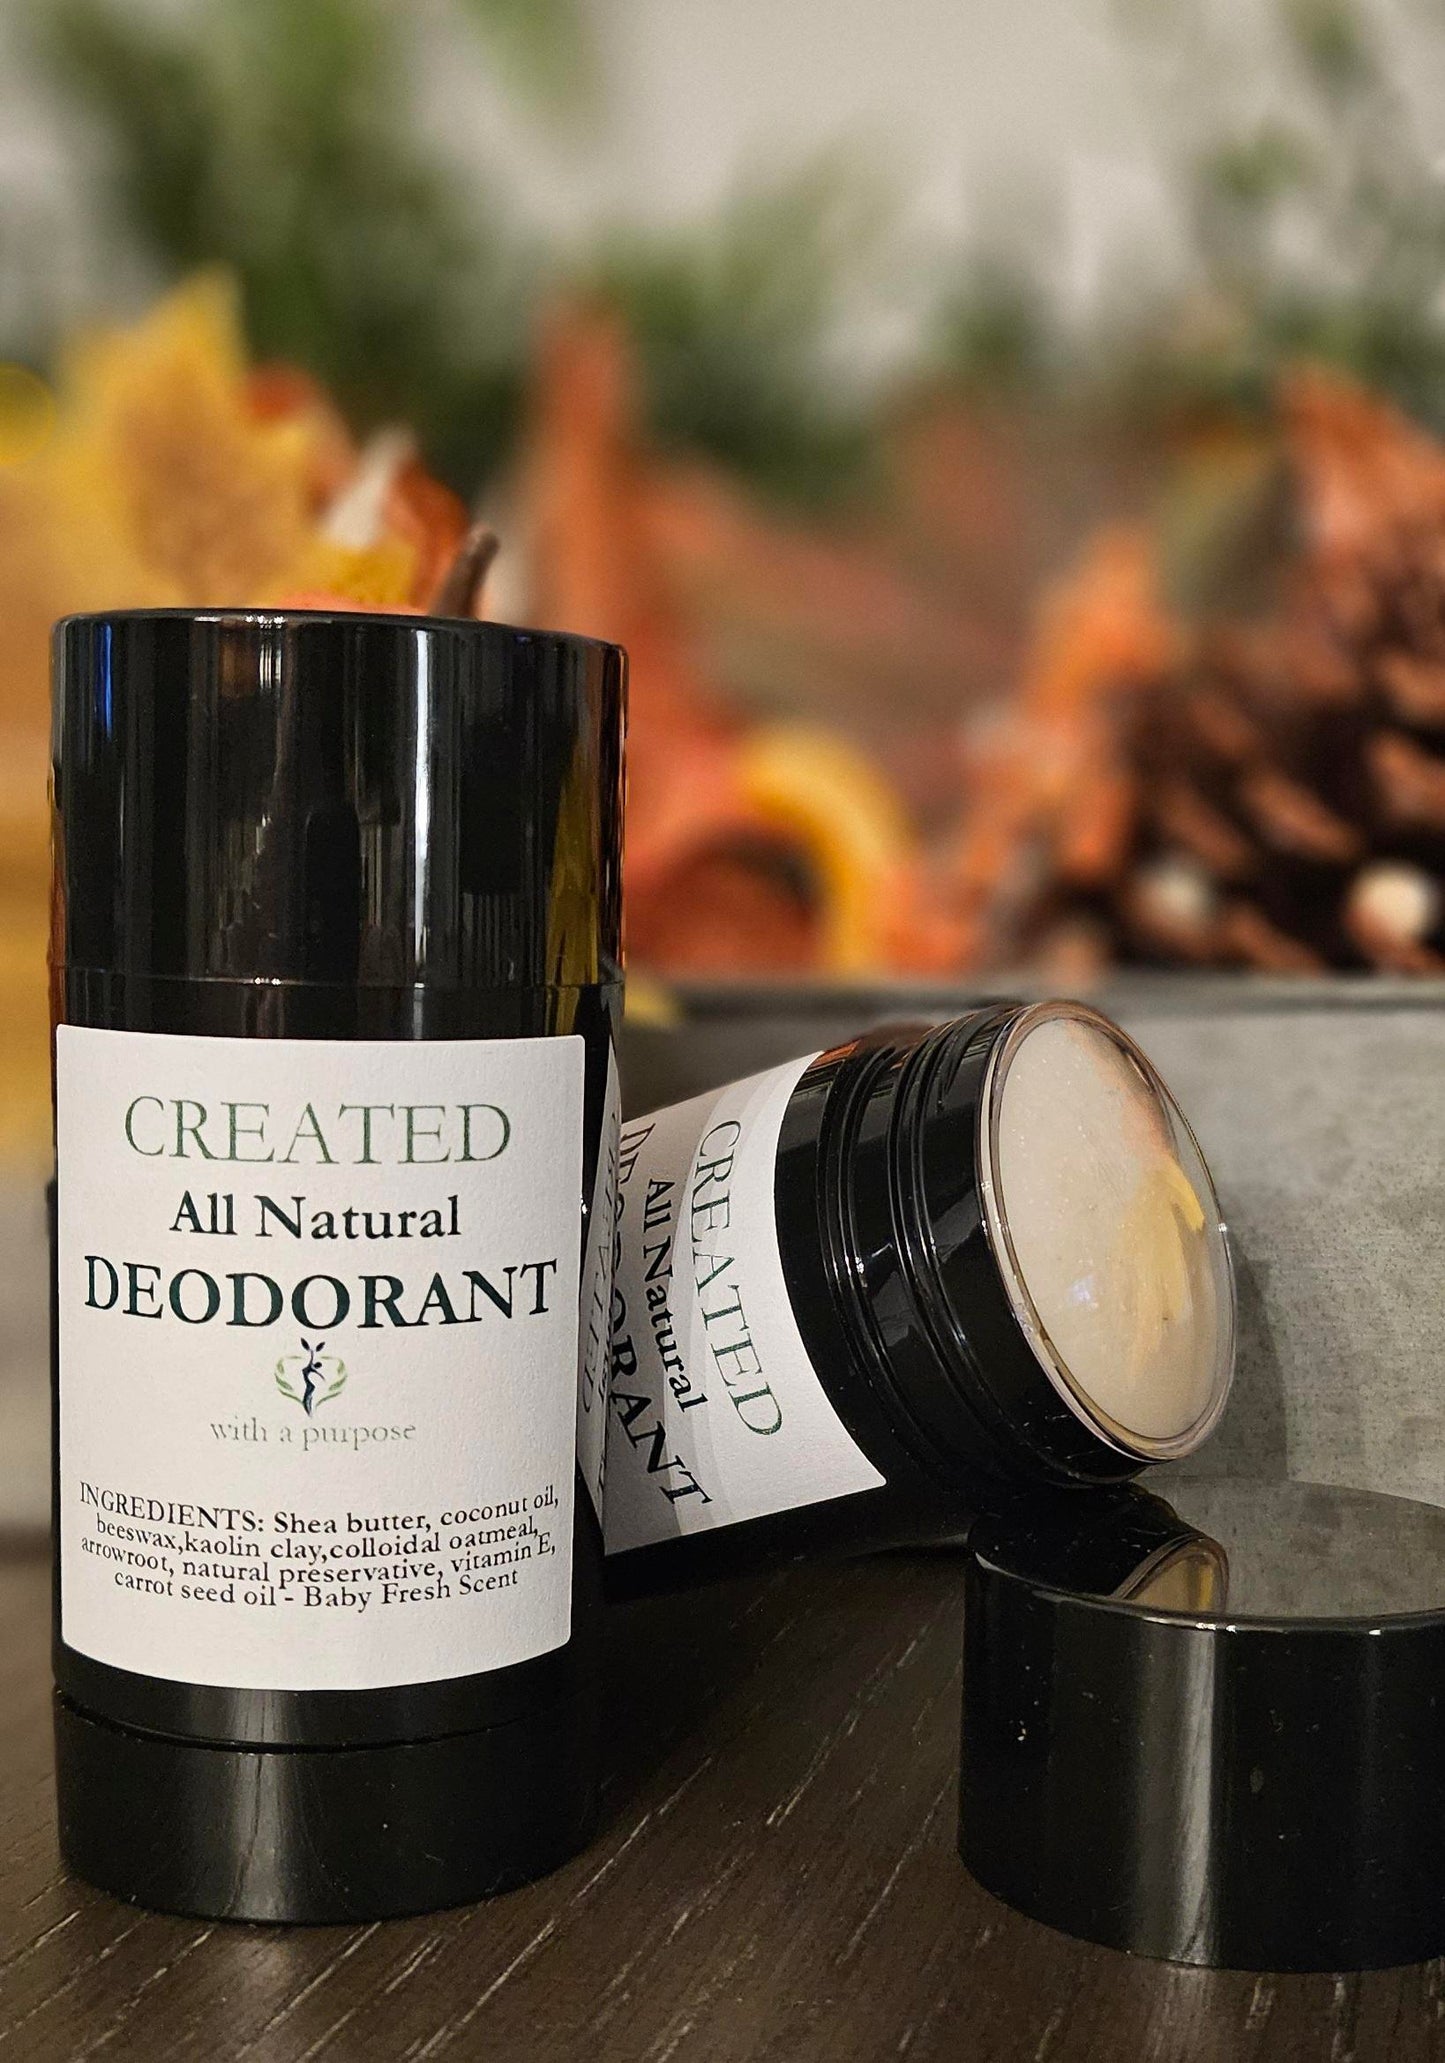 All Natural Deodorant - Fresh Baby Scent